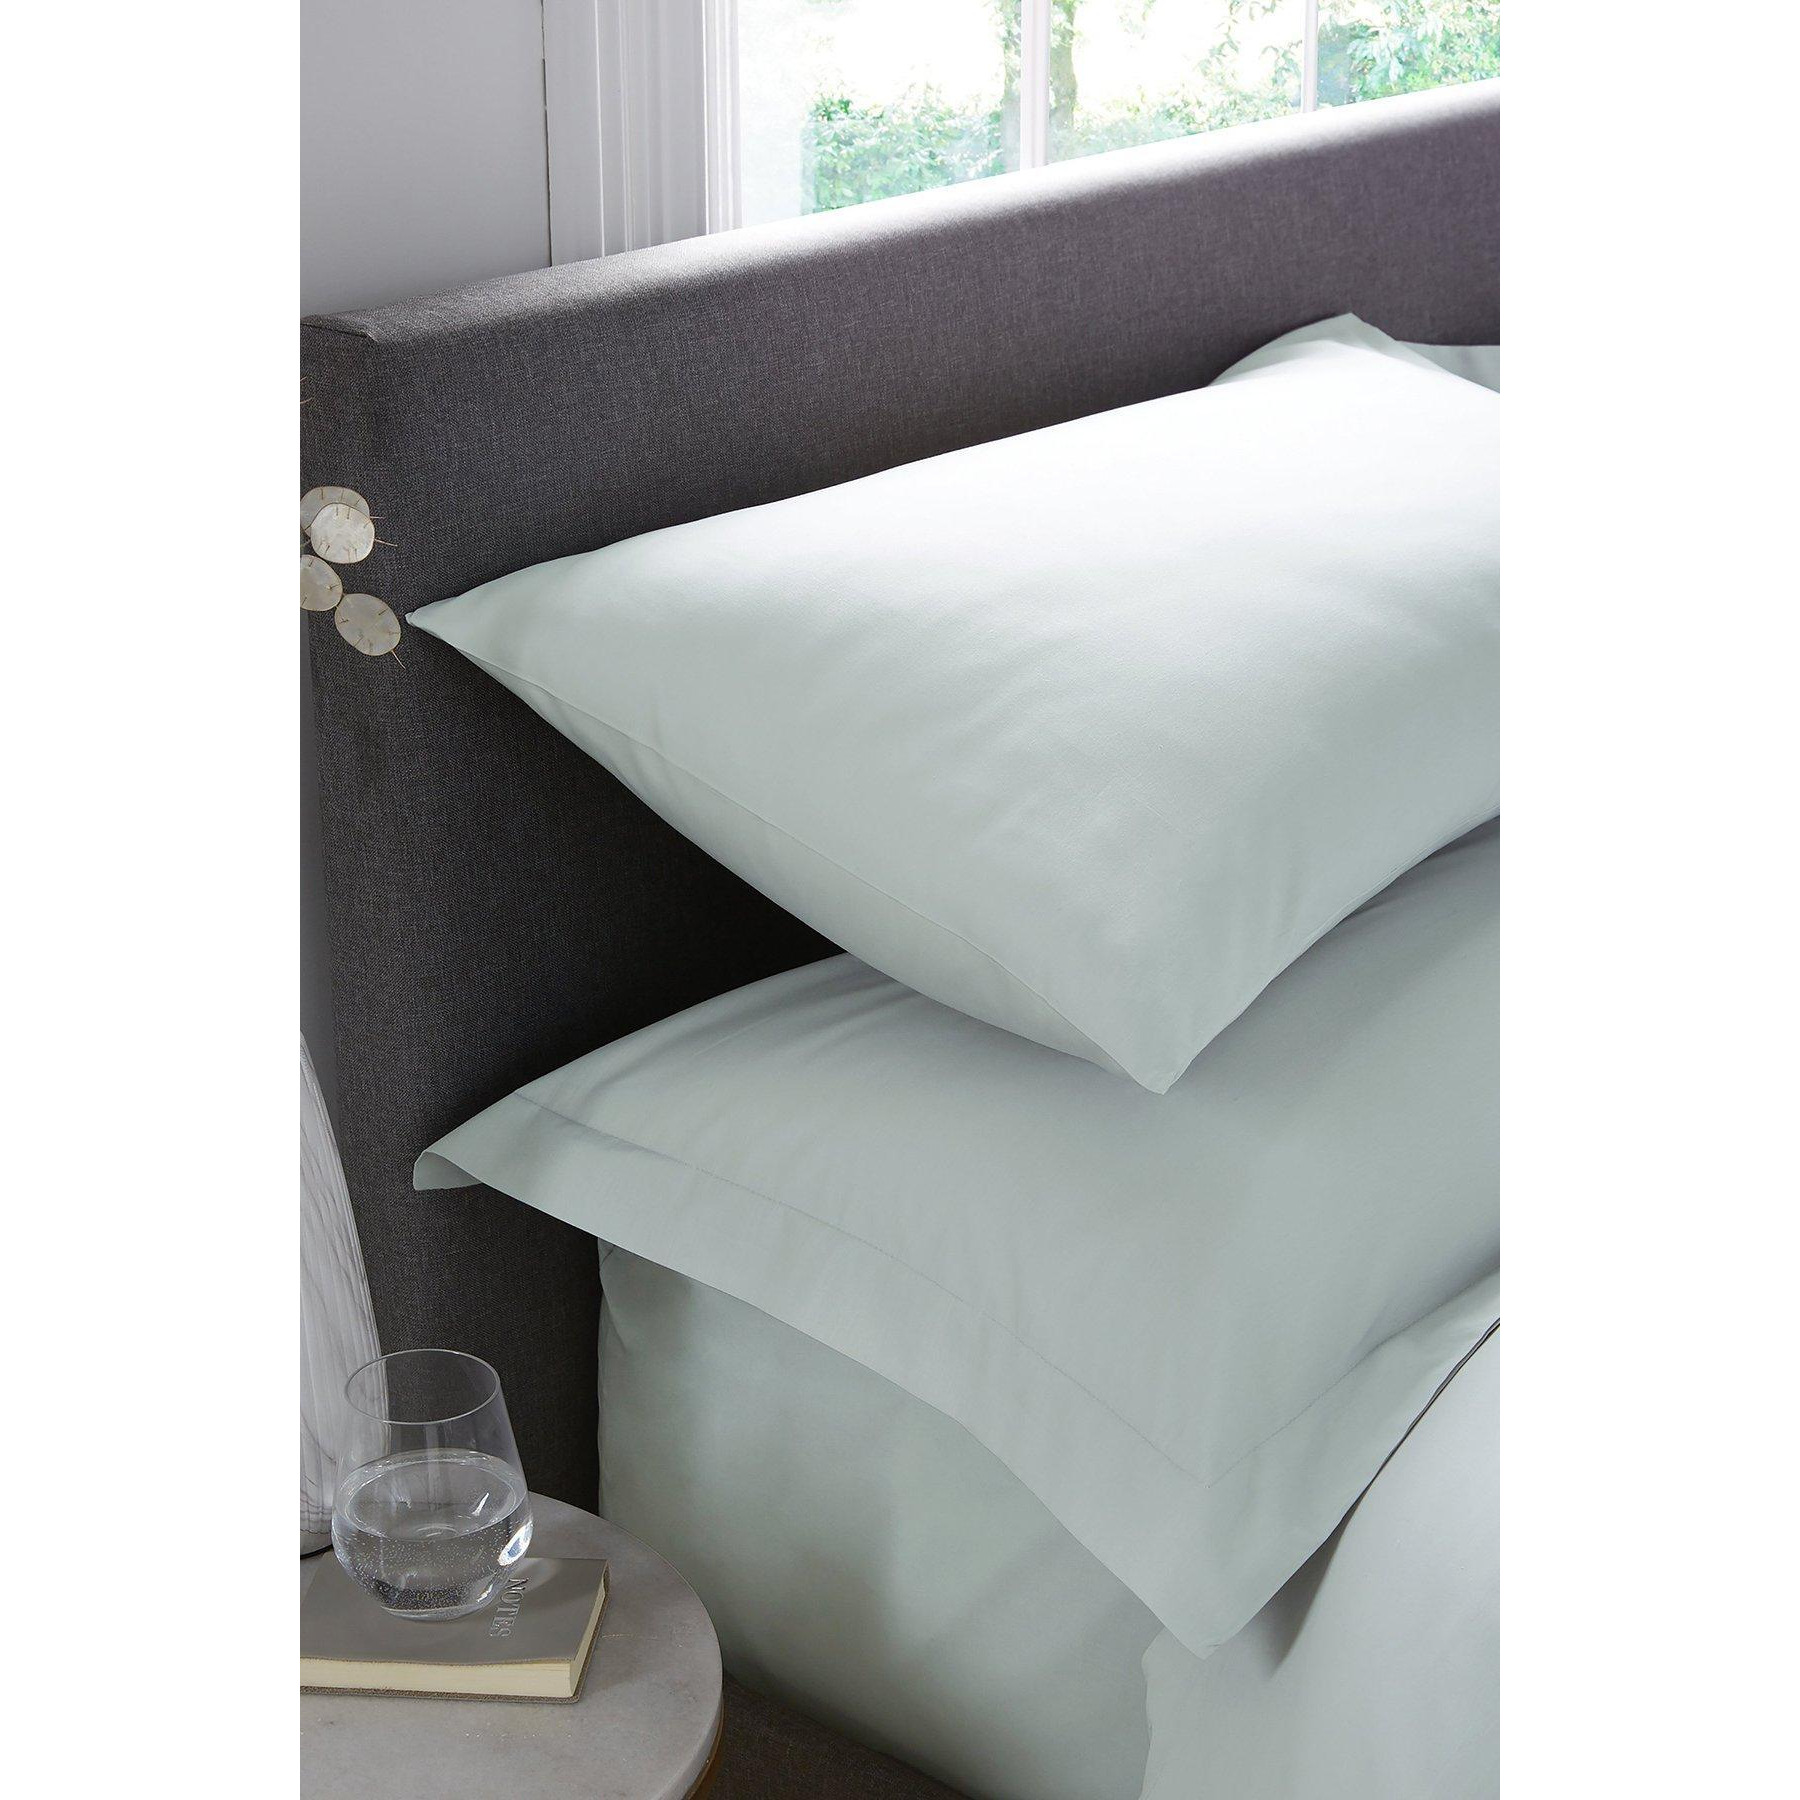 'Plain Dyed' Soft Touch Pair of Housewife Pillowcases - image 1